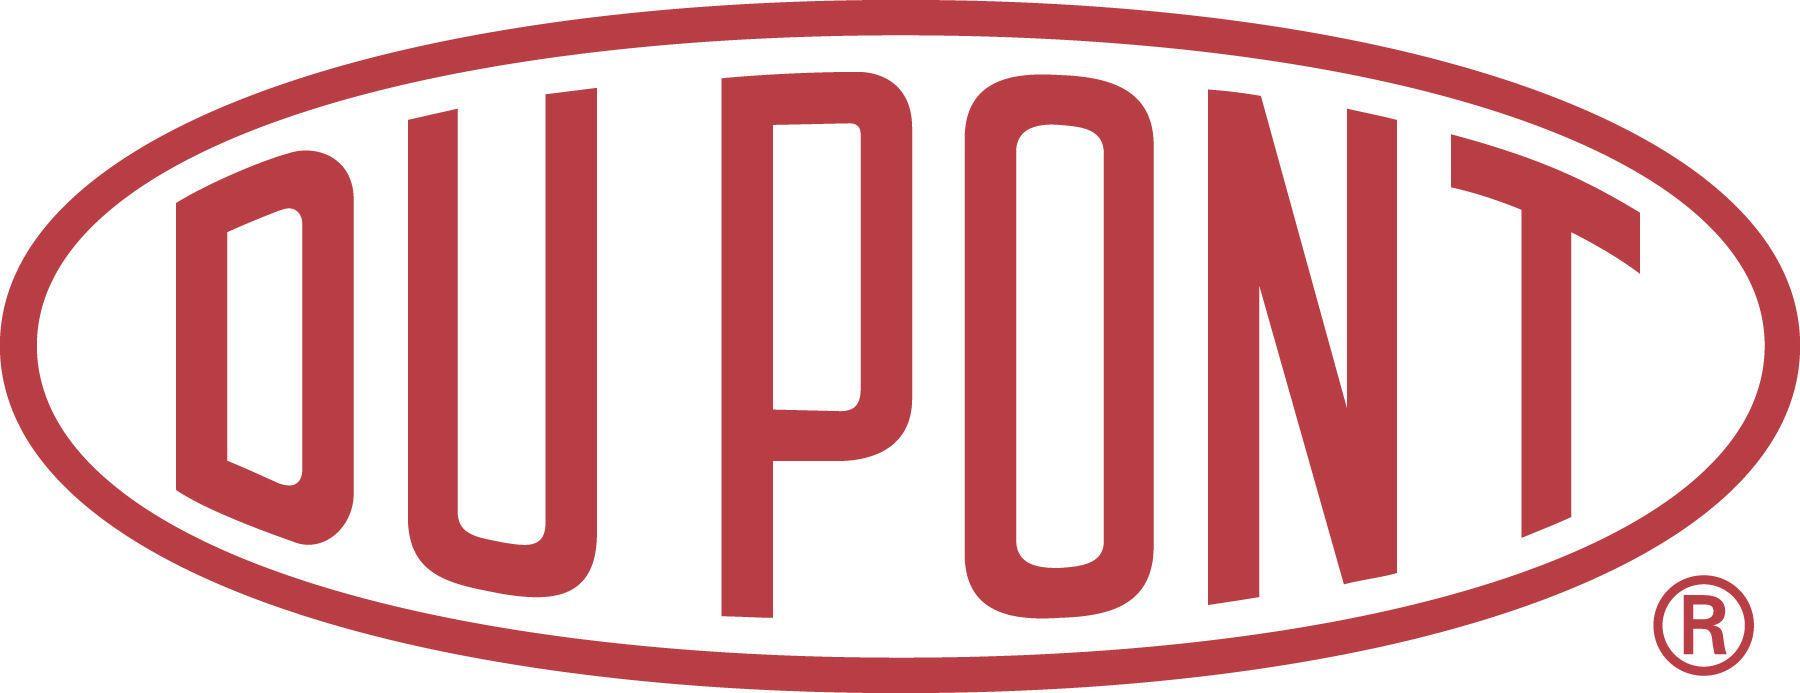 Profile with Red Oval Logo - DuPont Oval